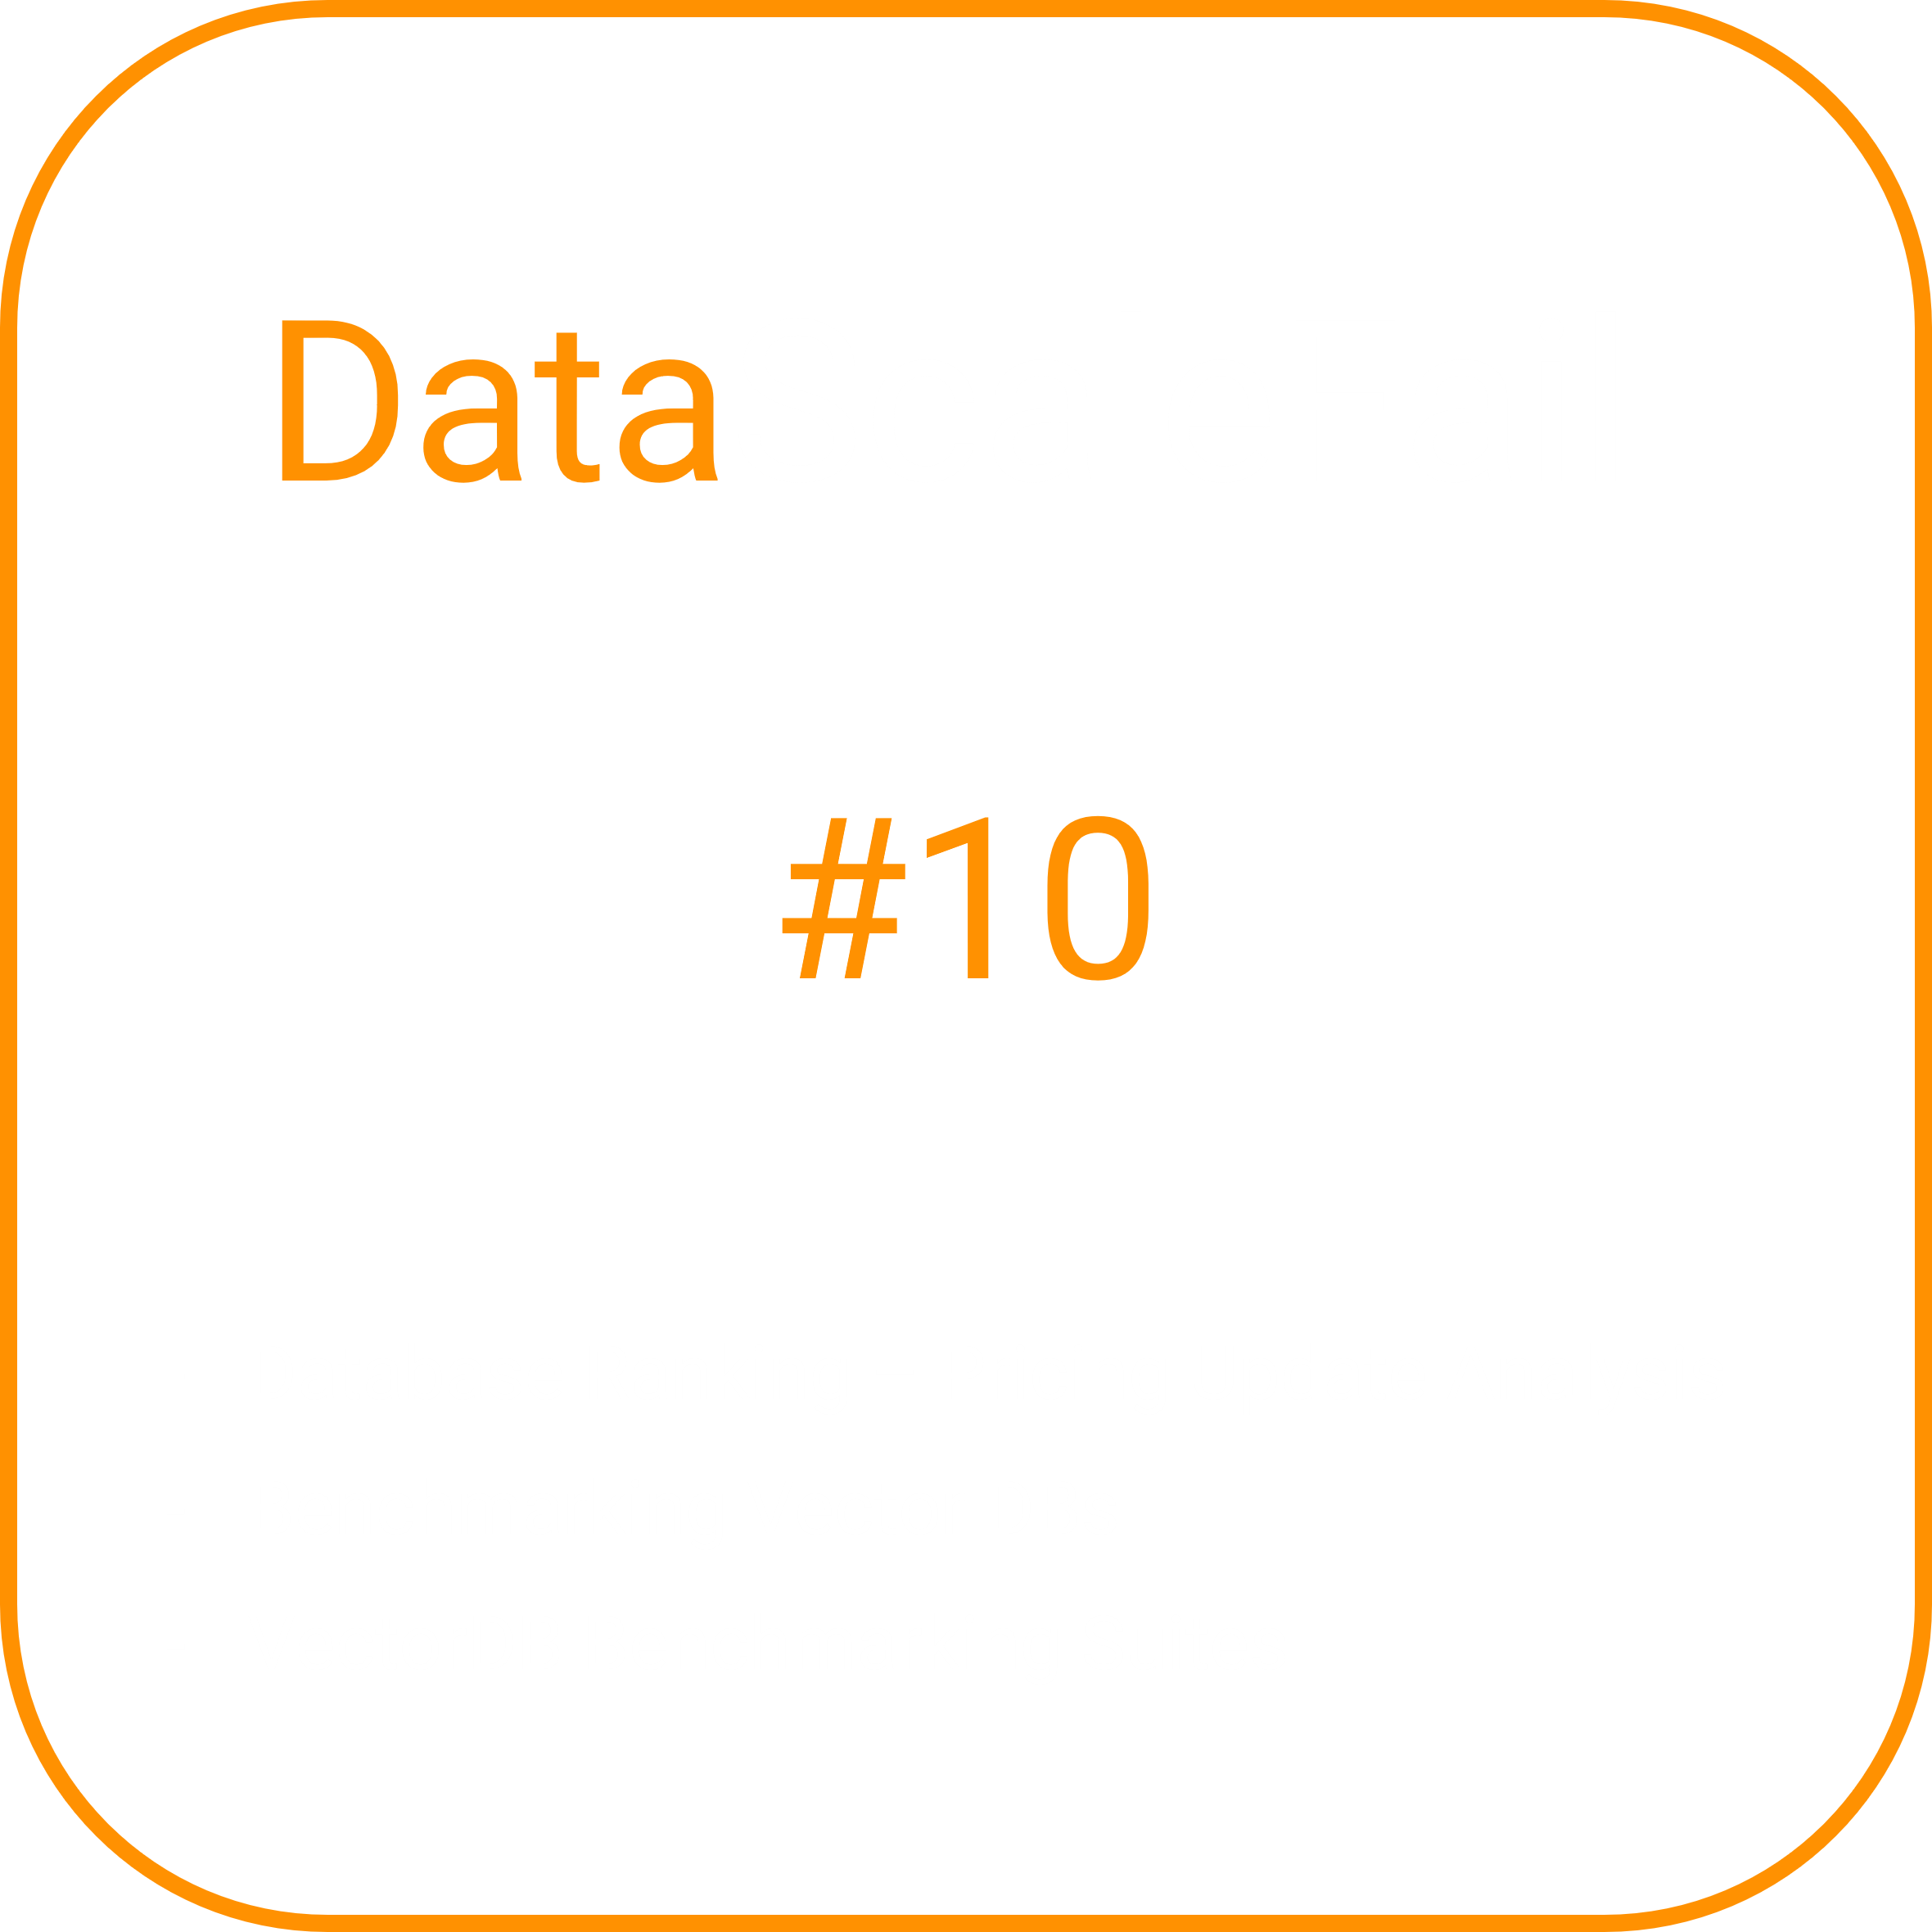 Thumbnail for DataScaleFail #10 - Database Ranking Pricing Update, VectorDB Benchmarking Guide and VectorDB Benchmarking Suites